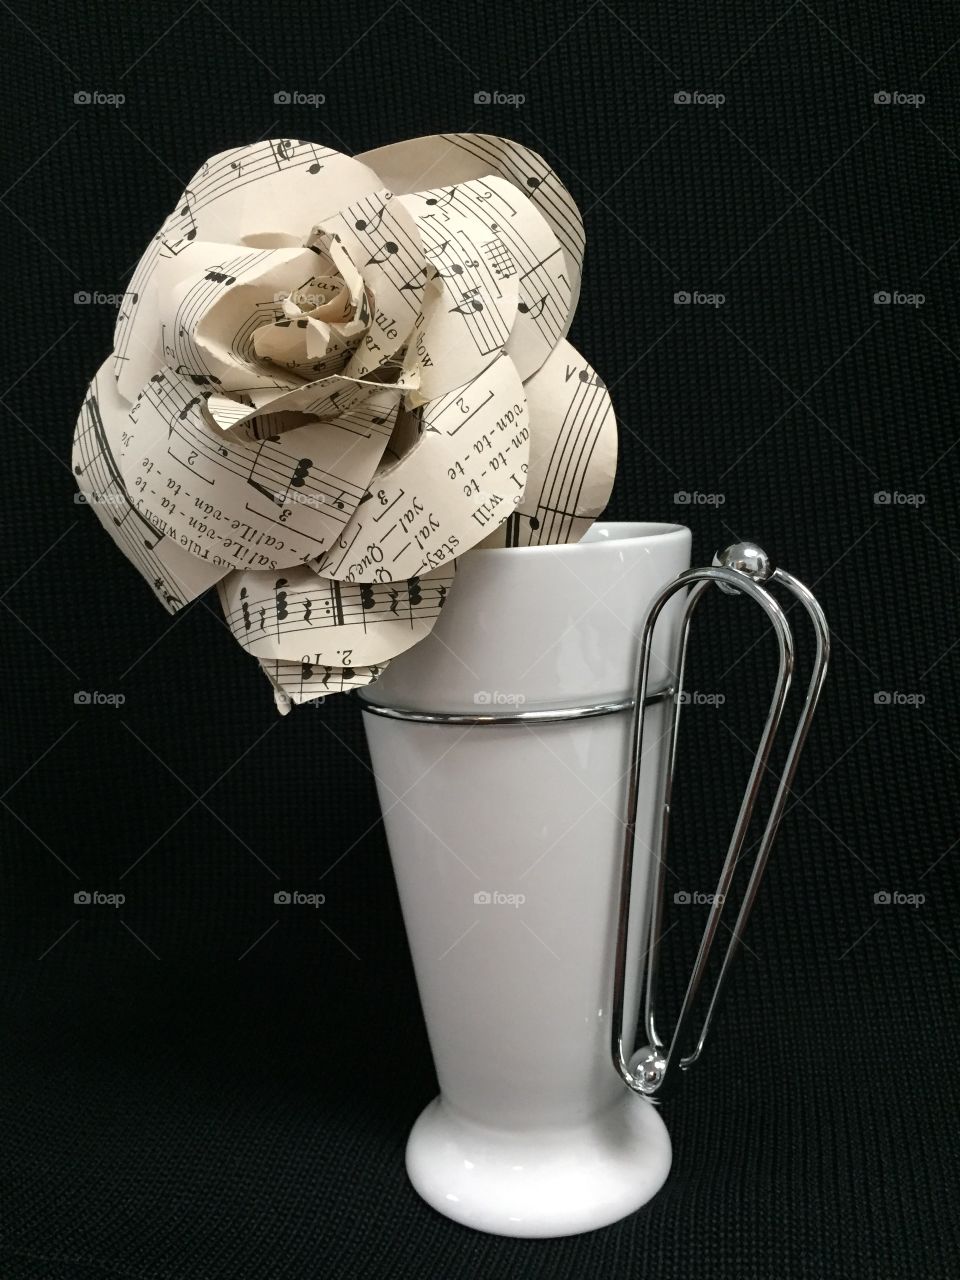 Black and white flower made of sheet music paper nested in a modern porcelain and metal mug